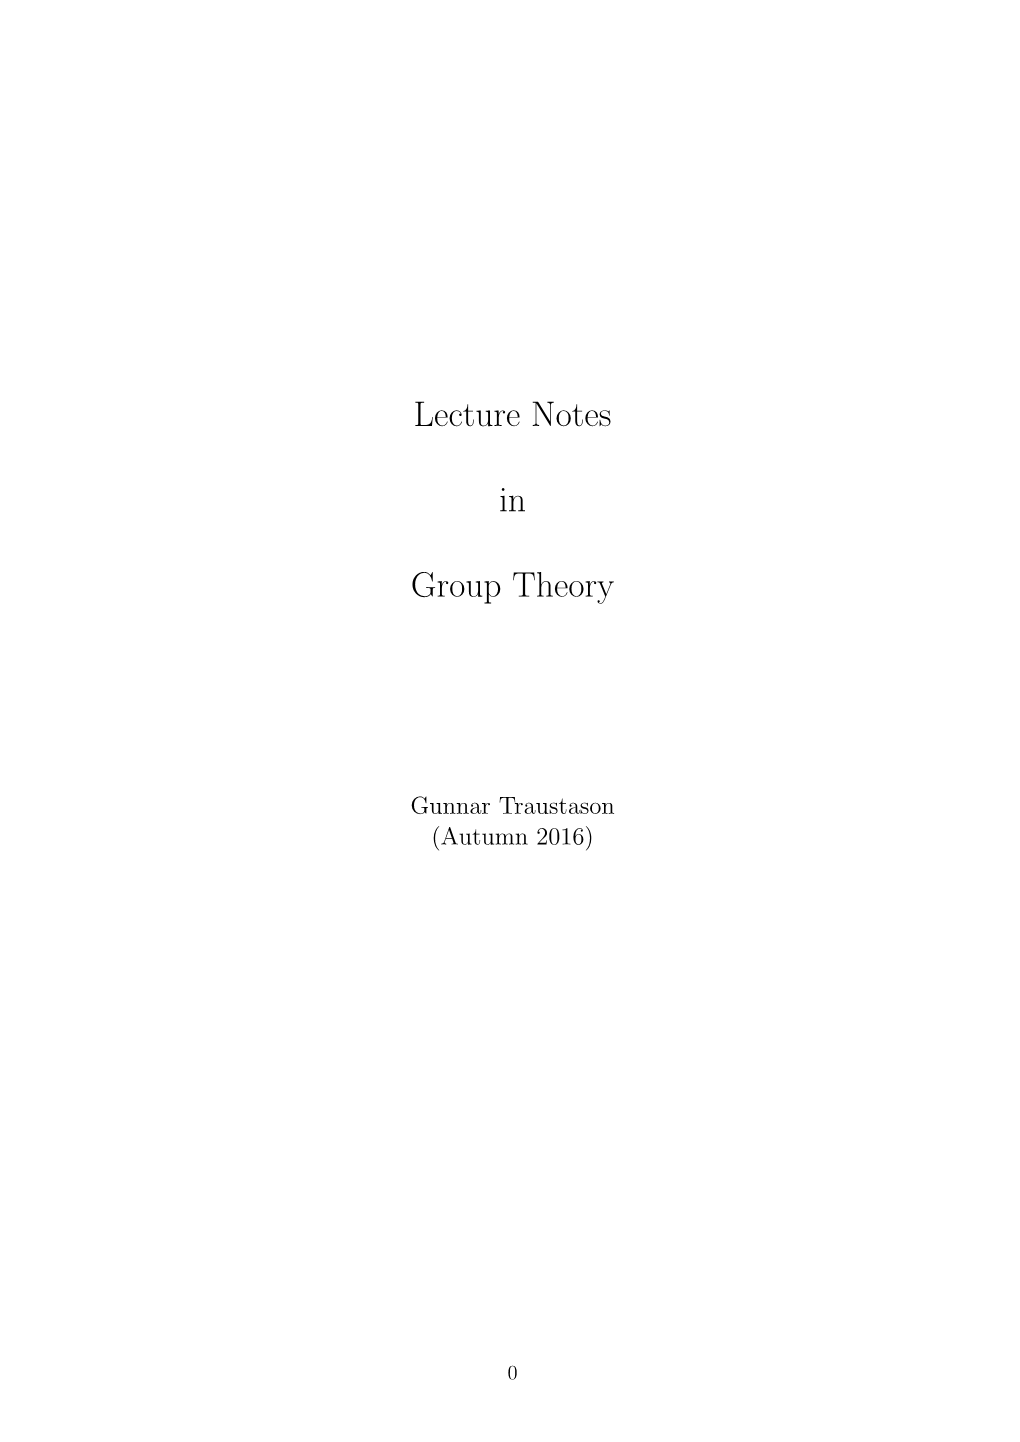 Lecture Notes in Group Theory